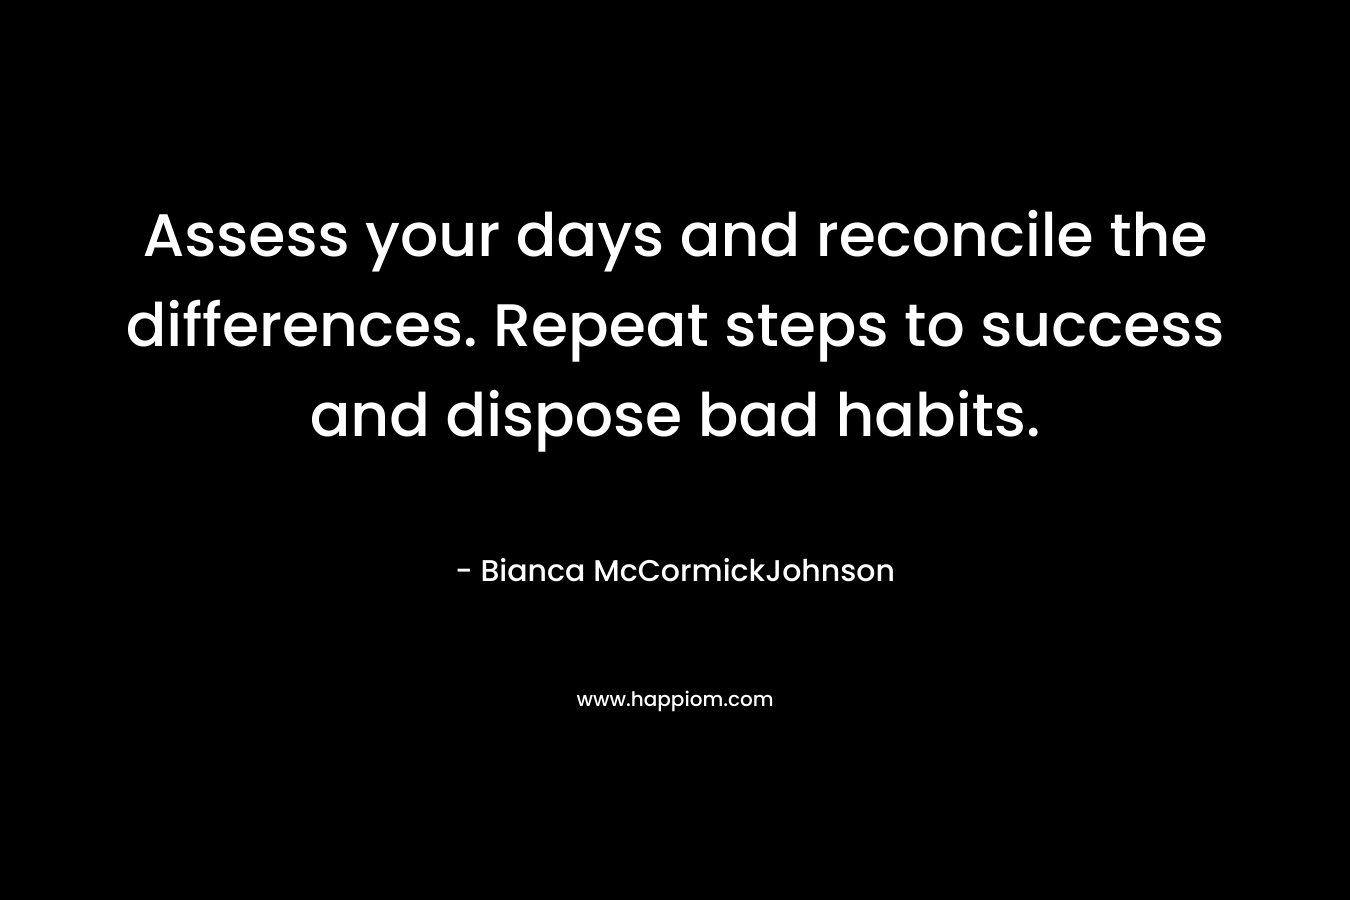 Assess your days and reconcile the differences. Repeat steps to success and dispose bad habits.